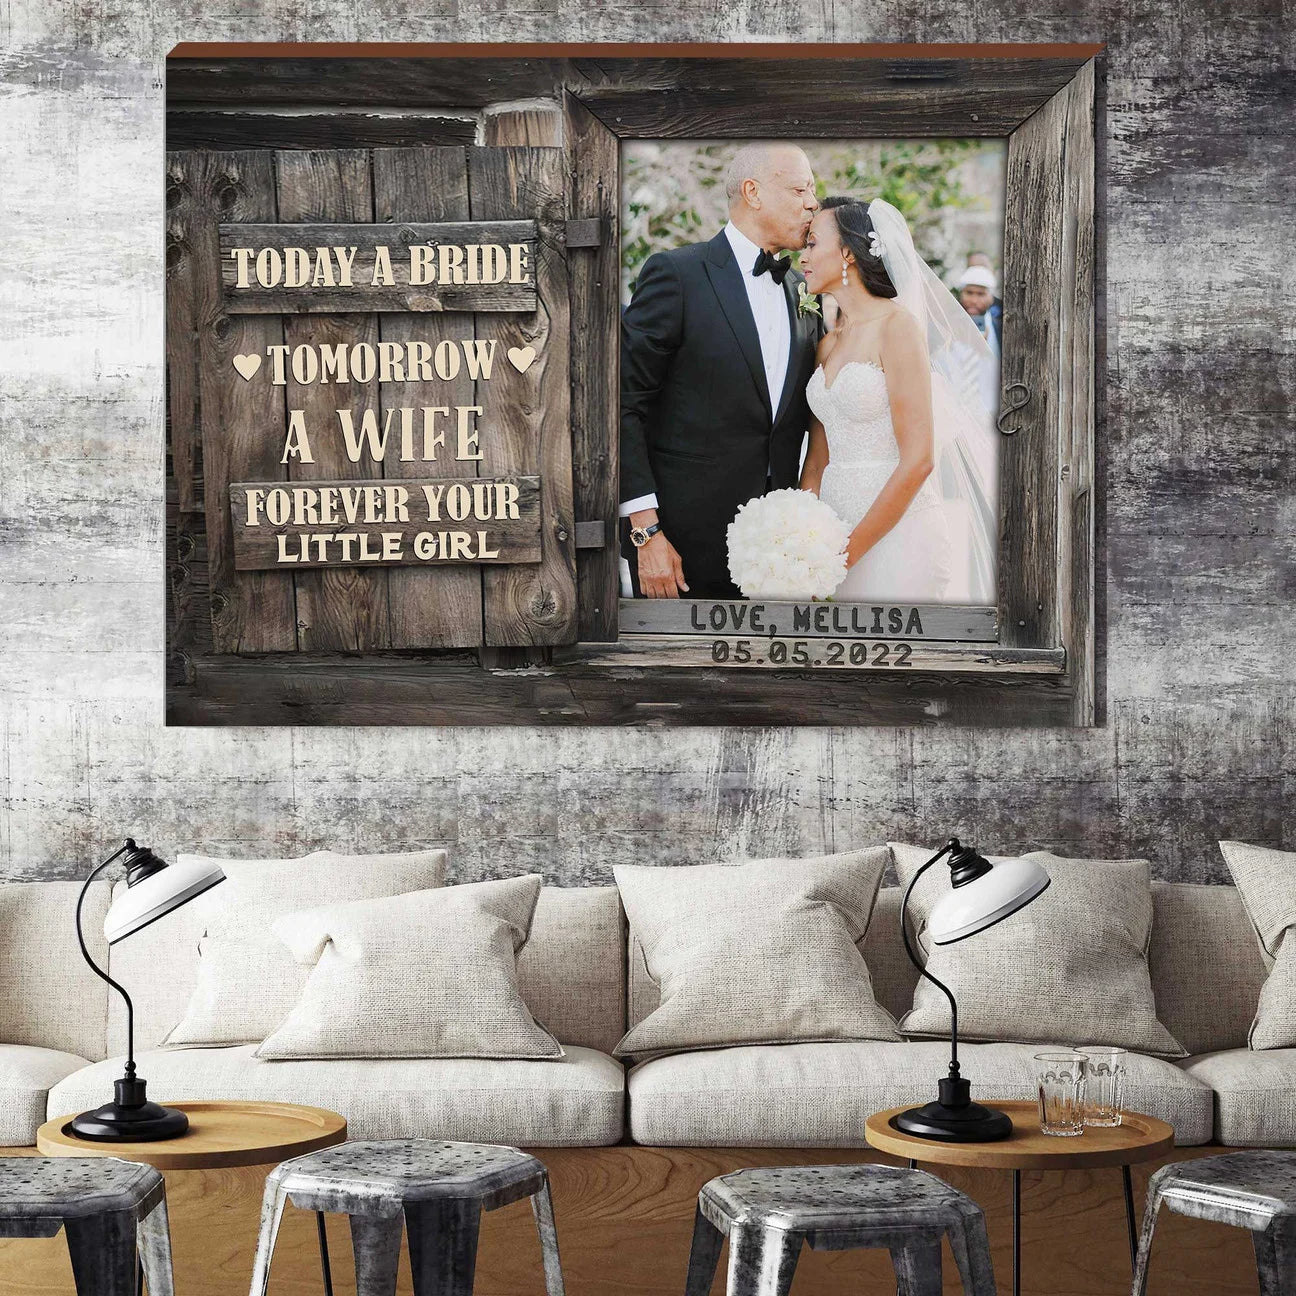 PresentsPrints, Father Of The Bride Gift Wedding Picture, Personalized Canvas for Dad in Daughter's Wedding, Canvas Wall Art